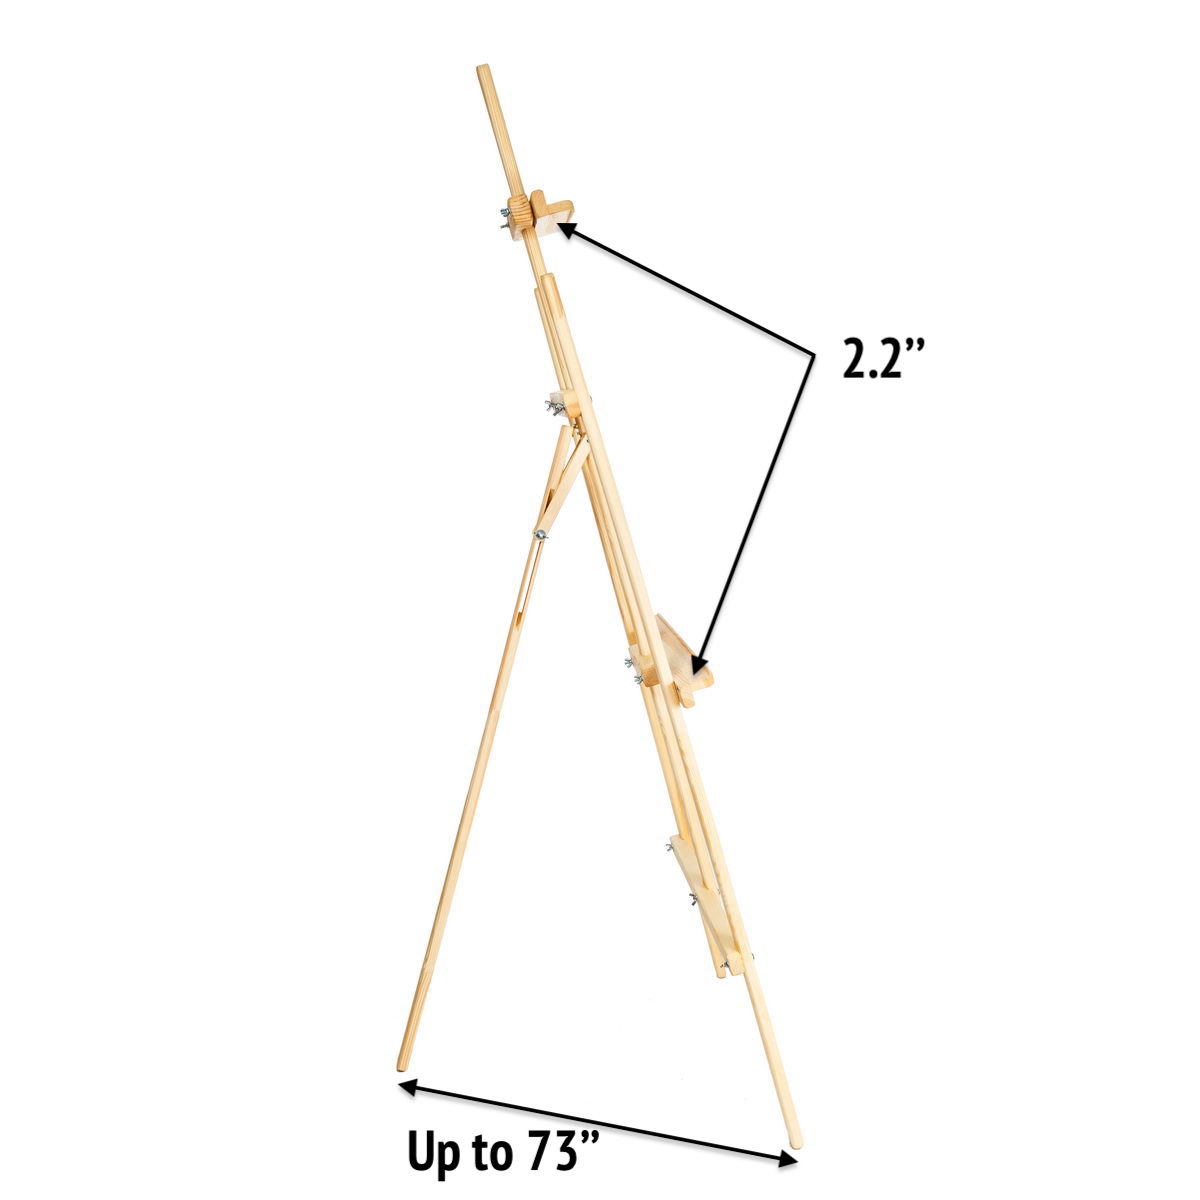 WOODEN EASEL STAND > 71 Tall Wooden Tripod Easel Display Floor